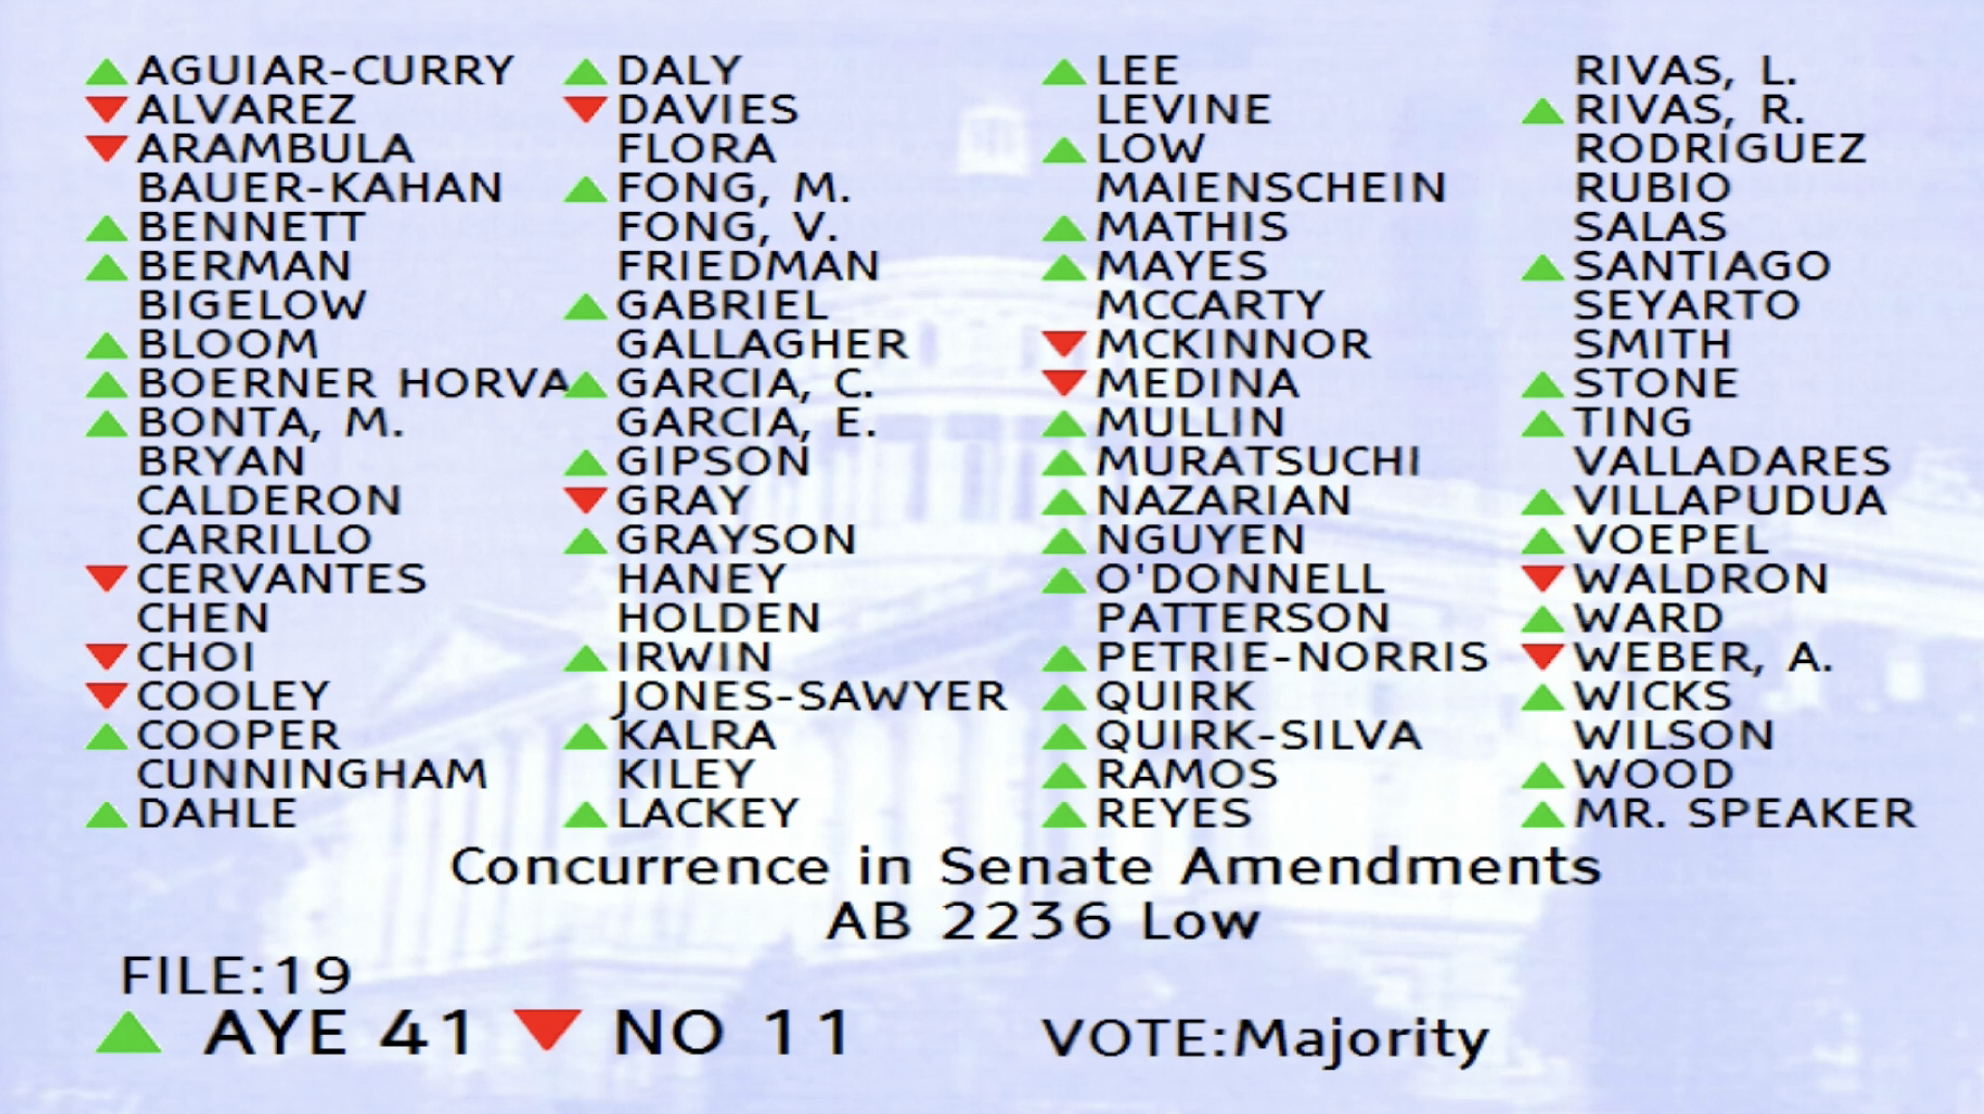 The final tally, which came at 11:50pm last night, gave the bill 41 votes in favor—exactly how many were needed for passage.